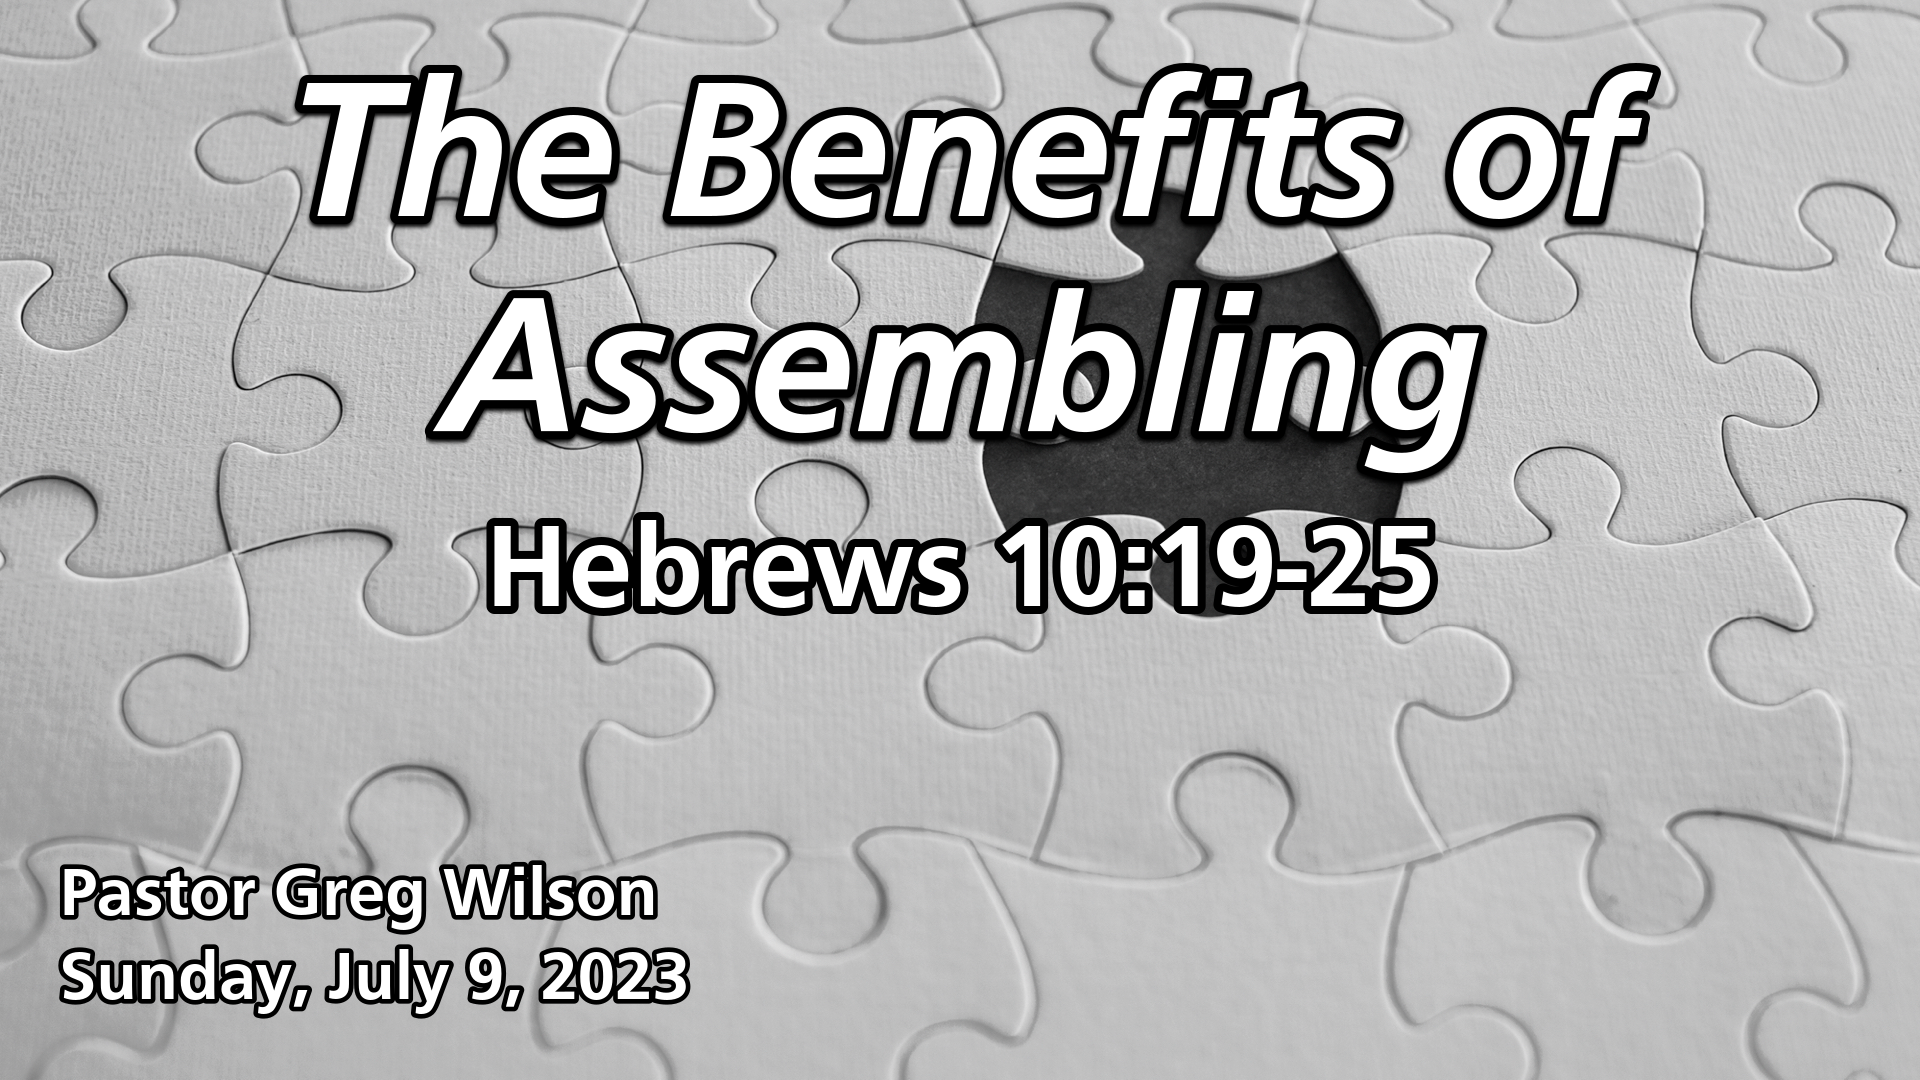 "The Benefits of Assembling"